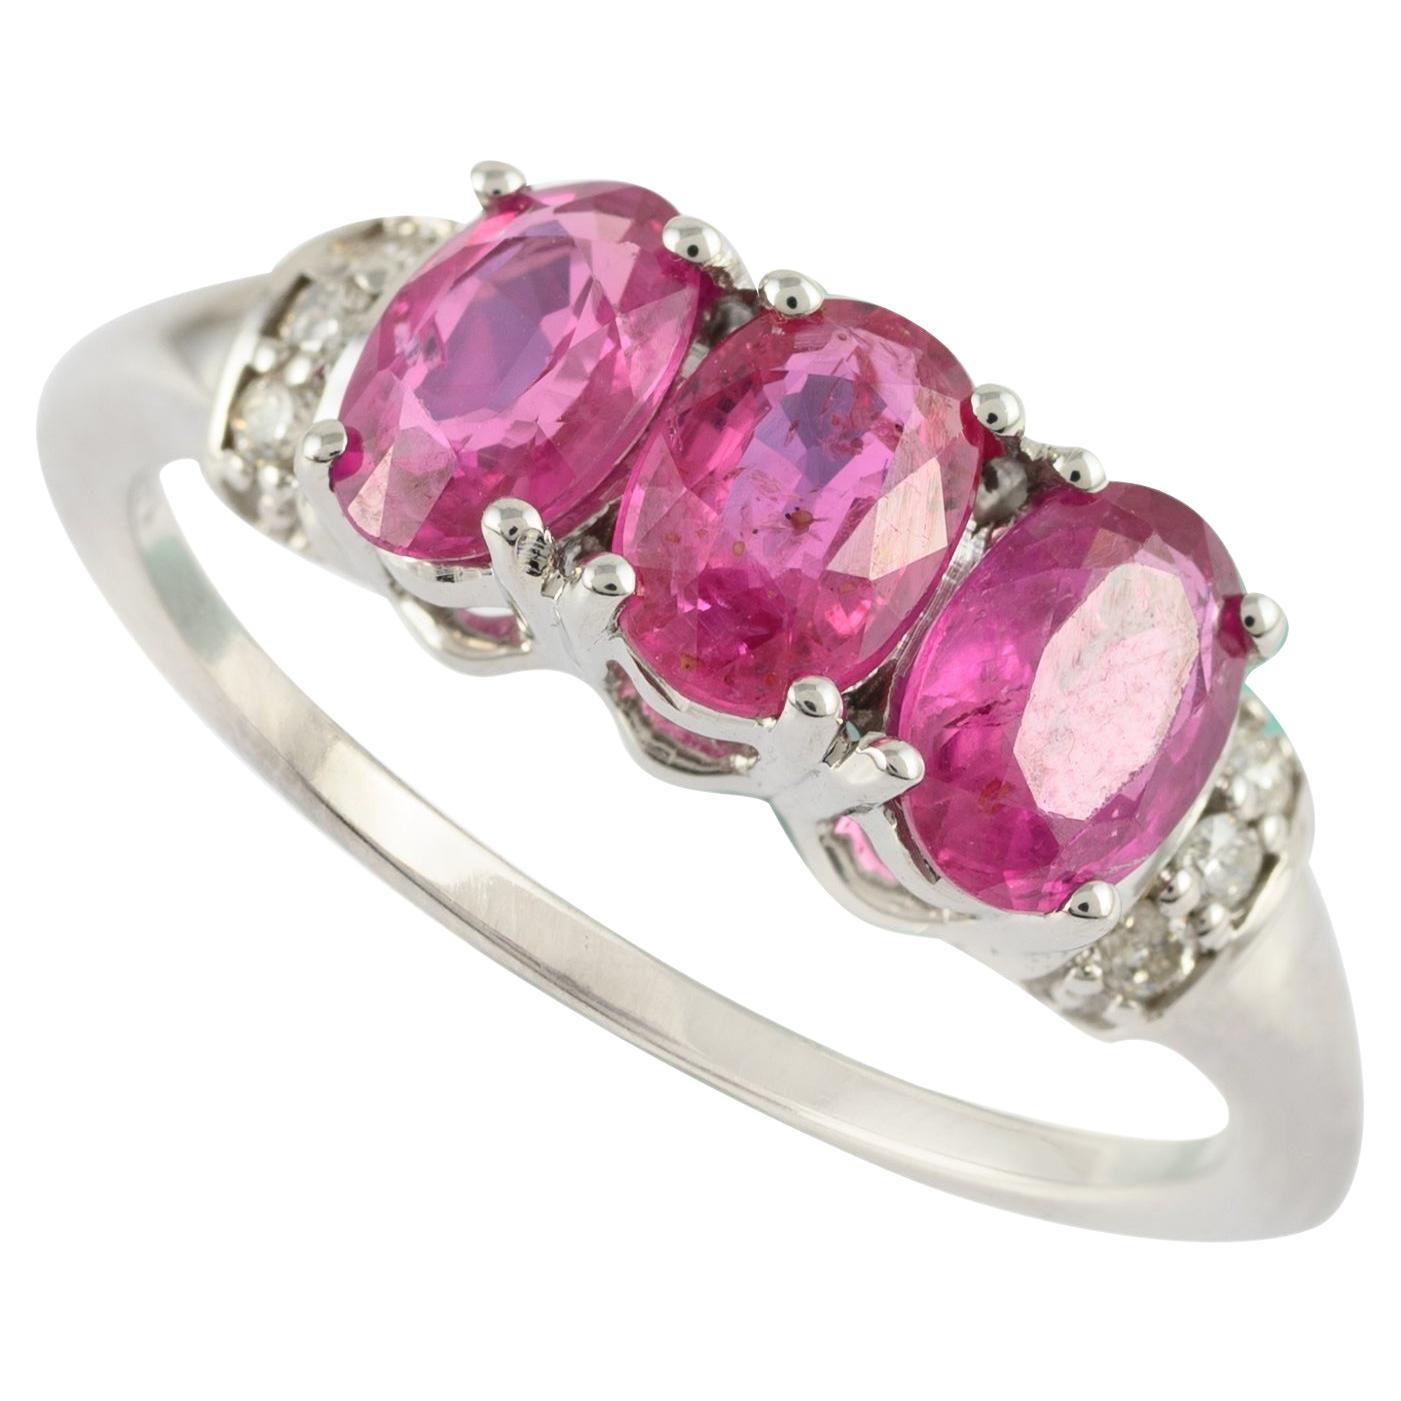 For Sale:  14k Solid White Gold Natural Oval Ruby Three-Stone Ring with Diamonds Accent